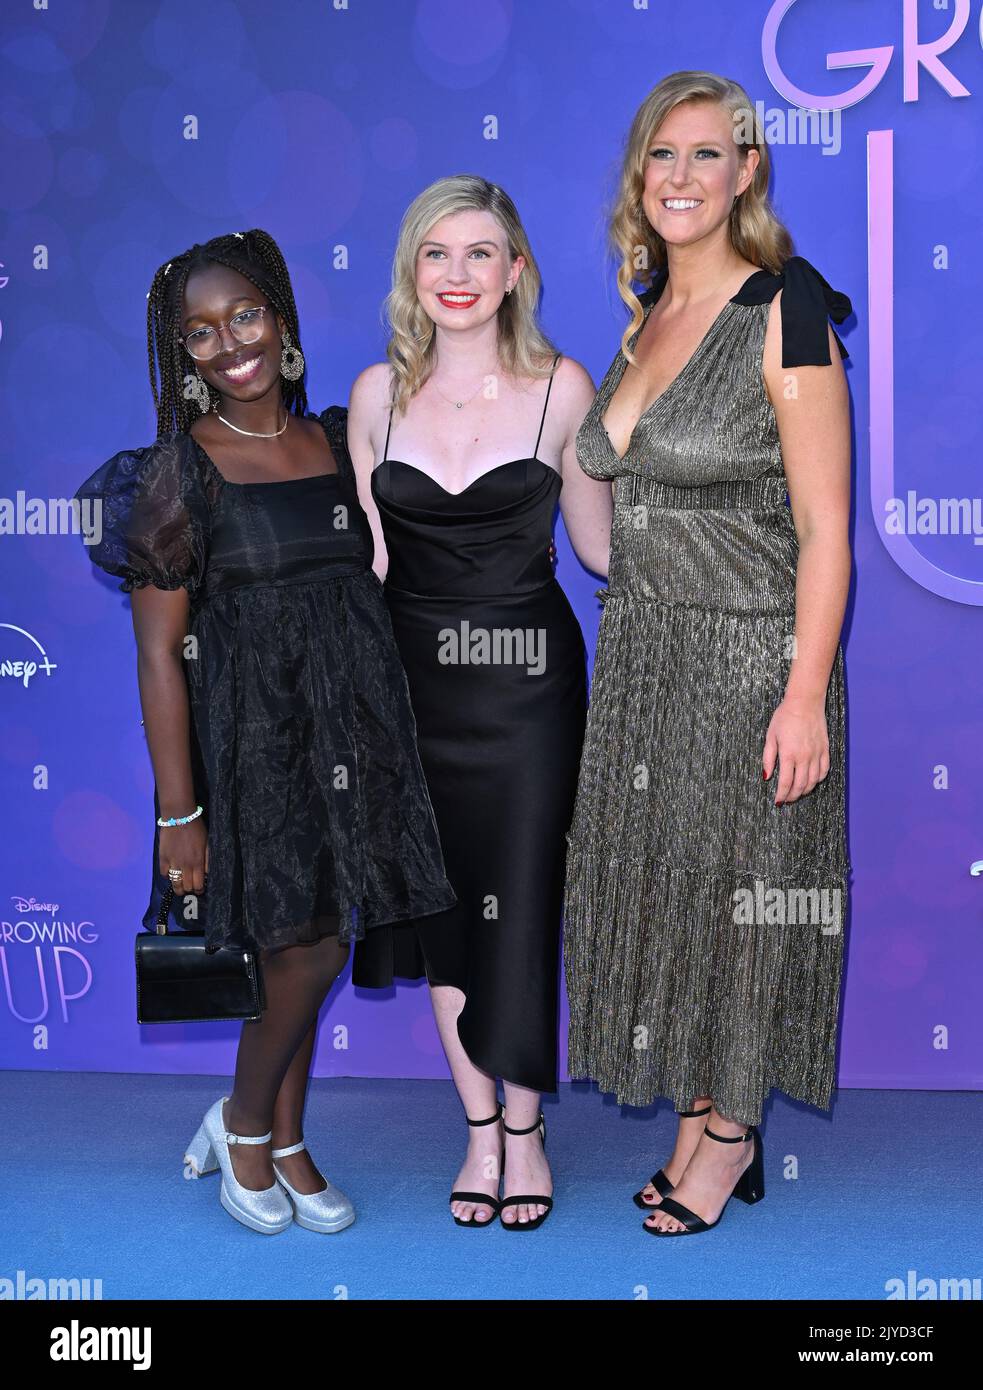 Los Angeles, USA. 07th Sep, 2022. LOS ANGELES, USA. September 07, 2022: Sofia Ongele, Alex Crotty & Nicole Galovski at the premiere for Disney  'Growing Up' at Neuhouse, Hollywood. Picture Credit: Paul Smith/Alamy Live News Stock Photo